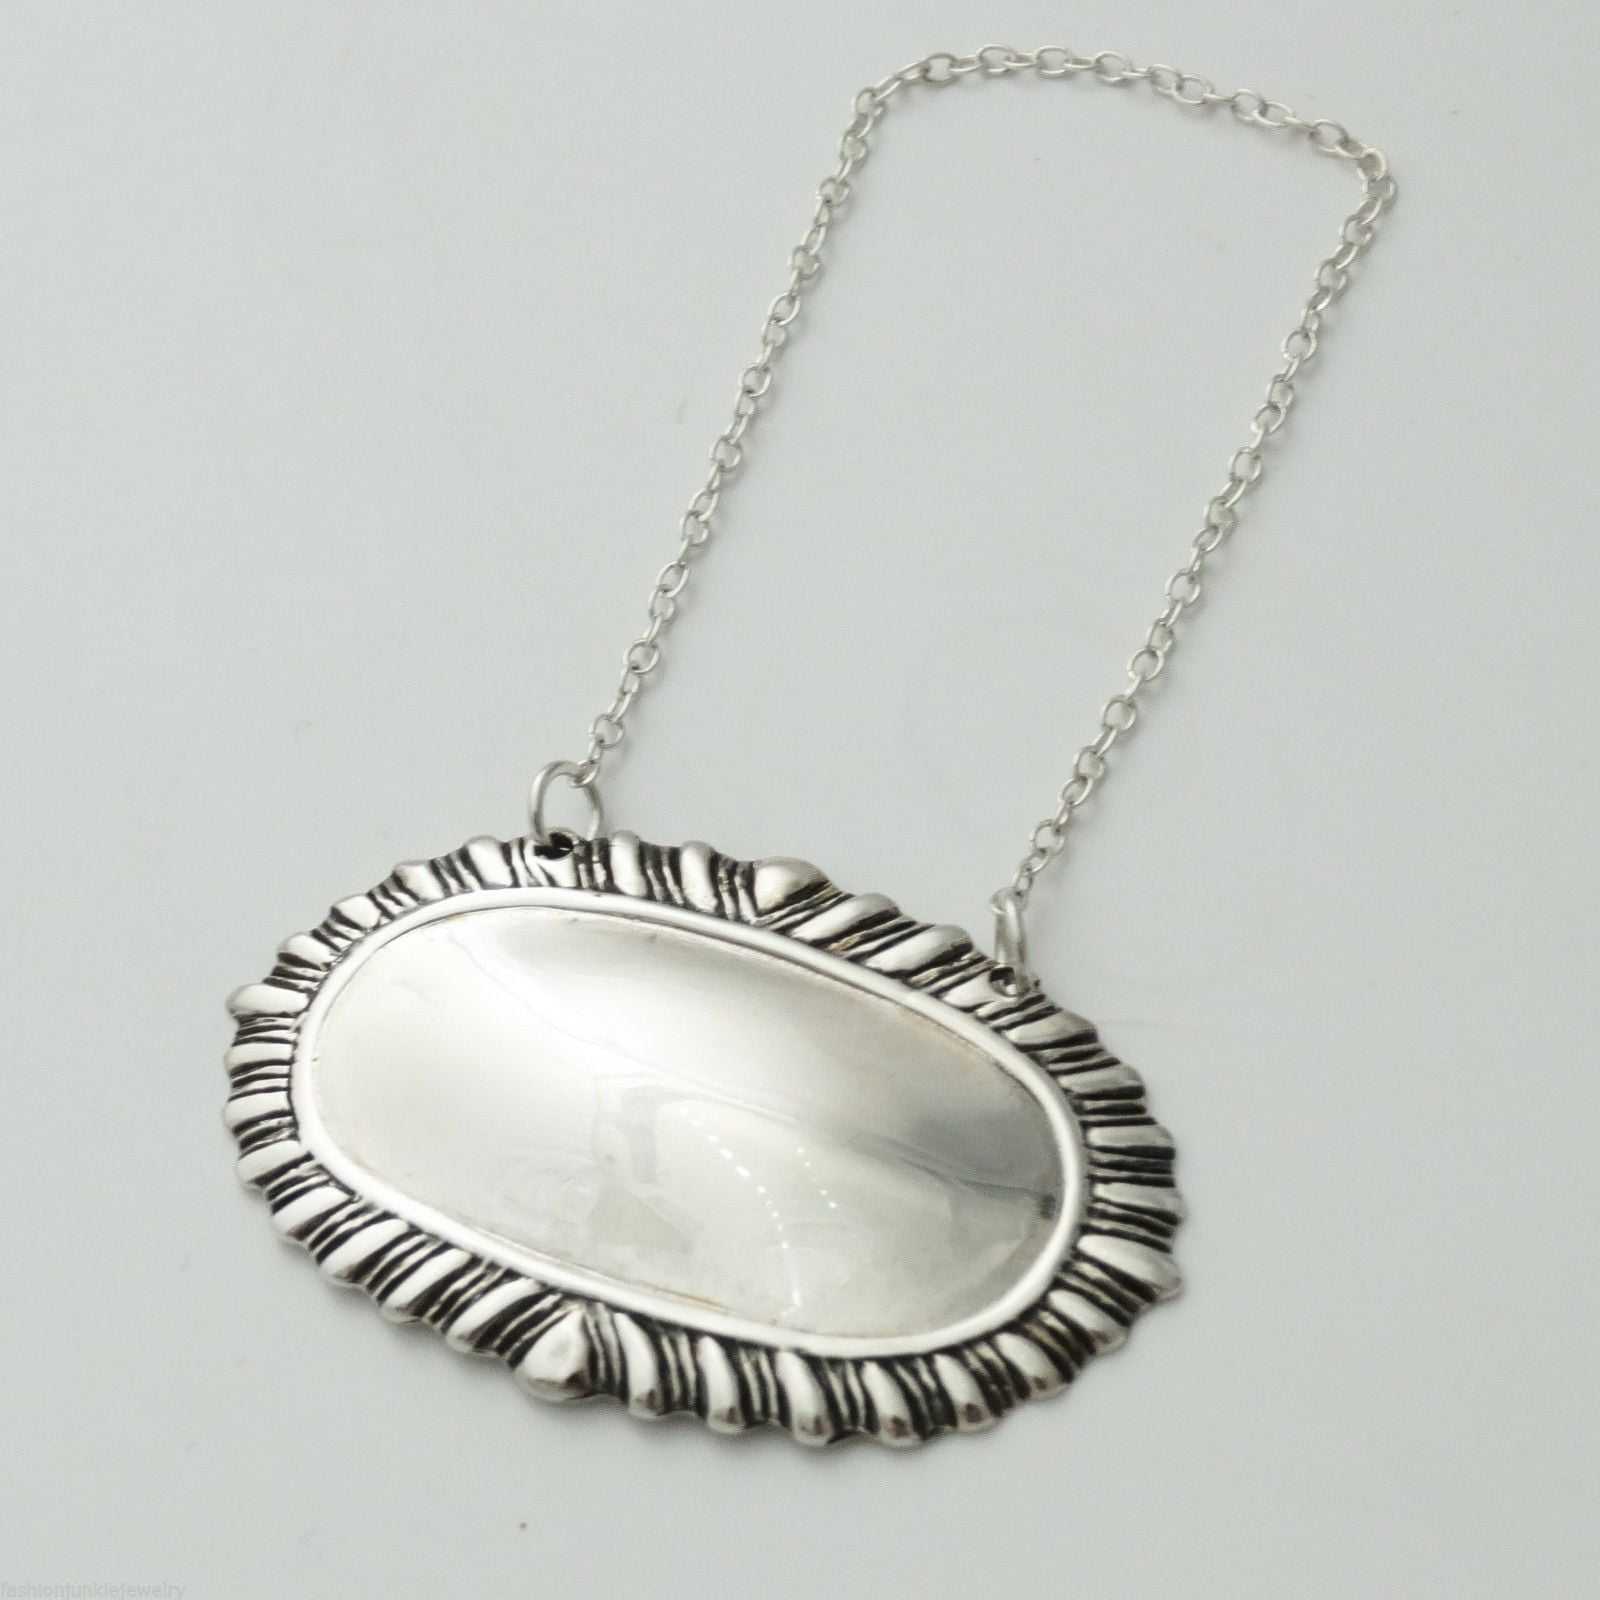 OVAL ORNATE STERLING SILVER LIQUOR 'BLANK' TAG NEW LAST ONES 